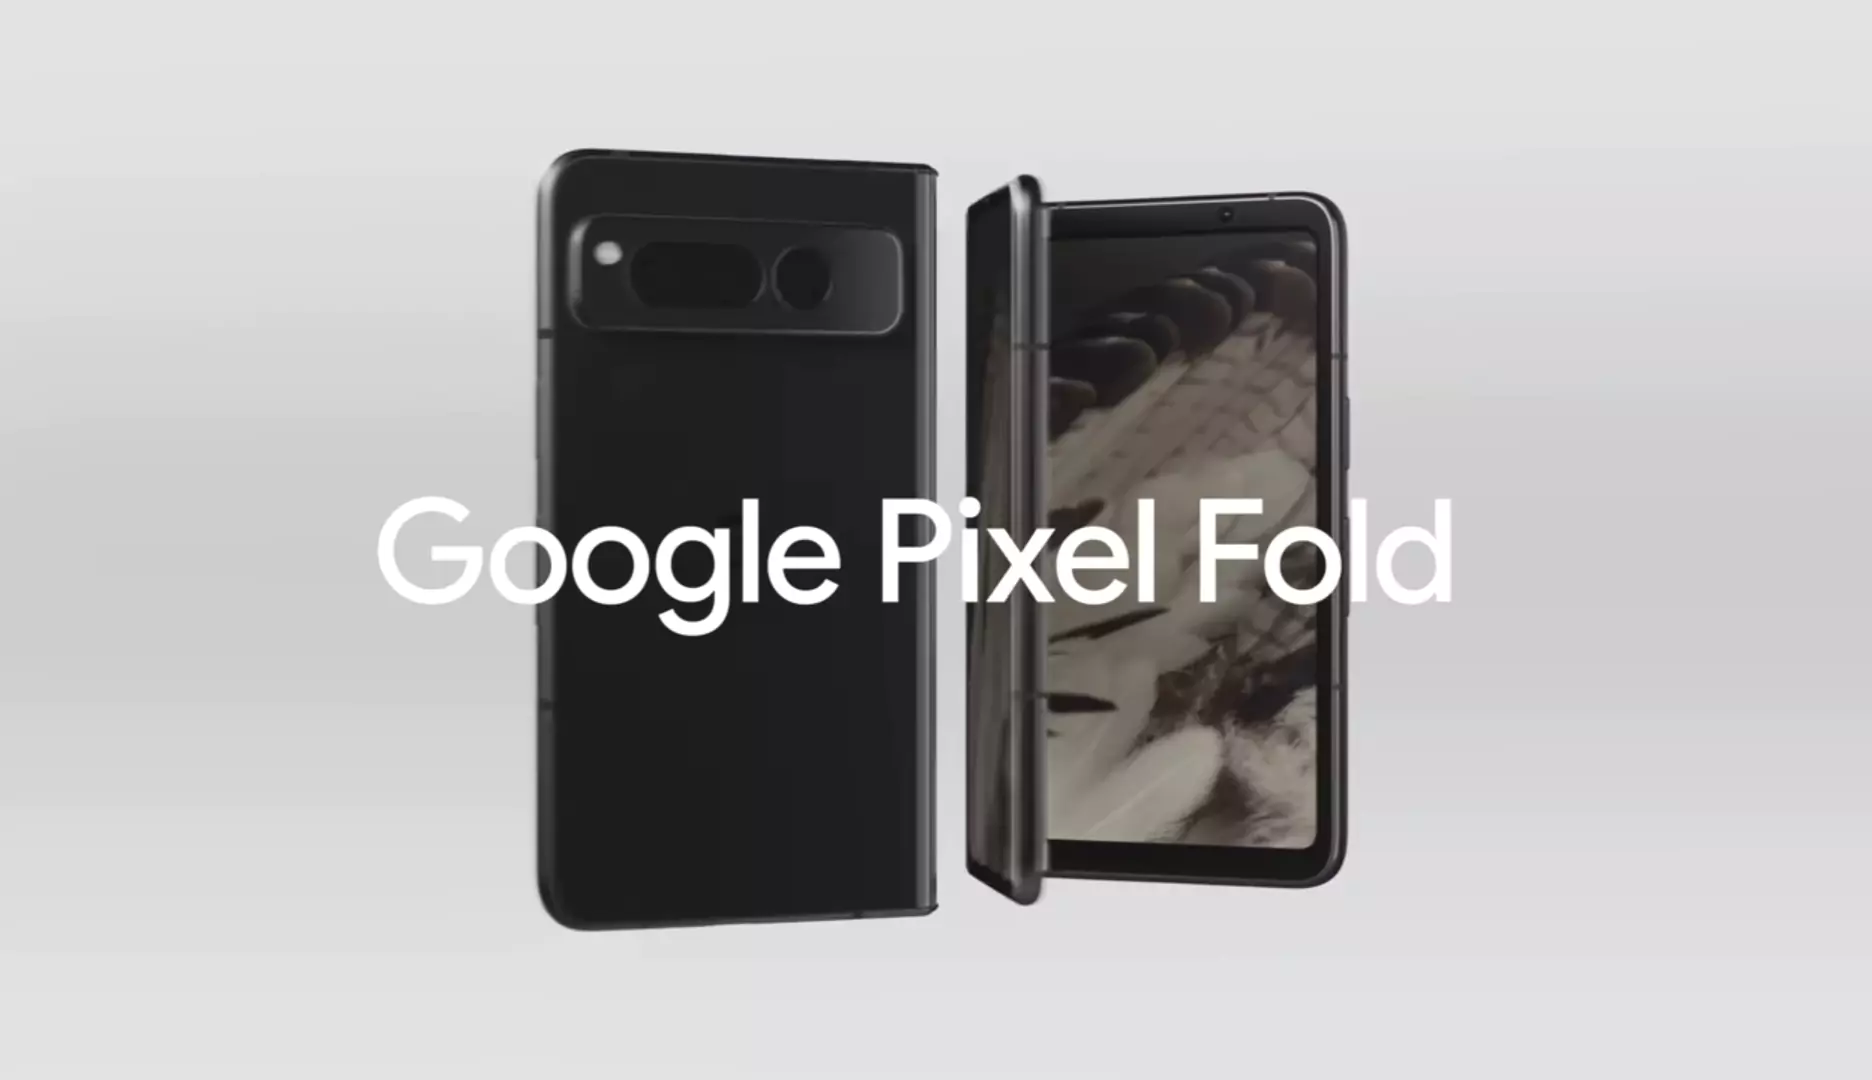 You are currently viewing Google Pixel Fold: Launched With Tensor G2 Chip, 120Hz OLED Display: First Foldable smartphone From Google